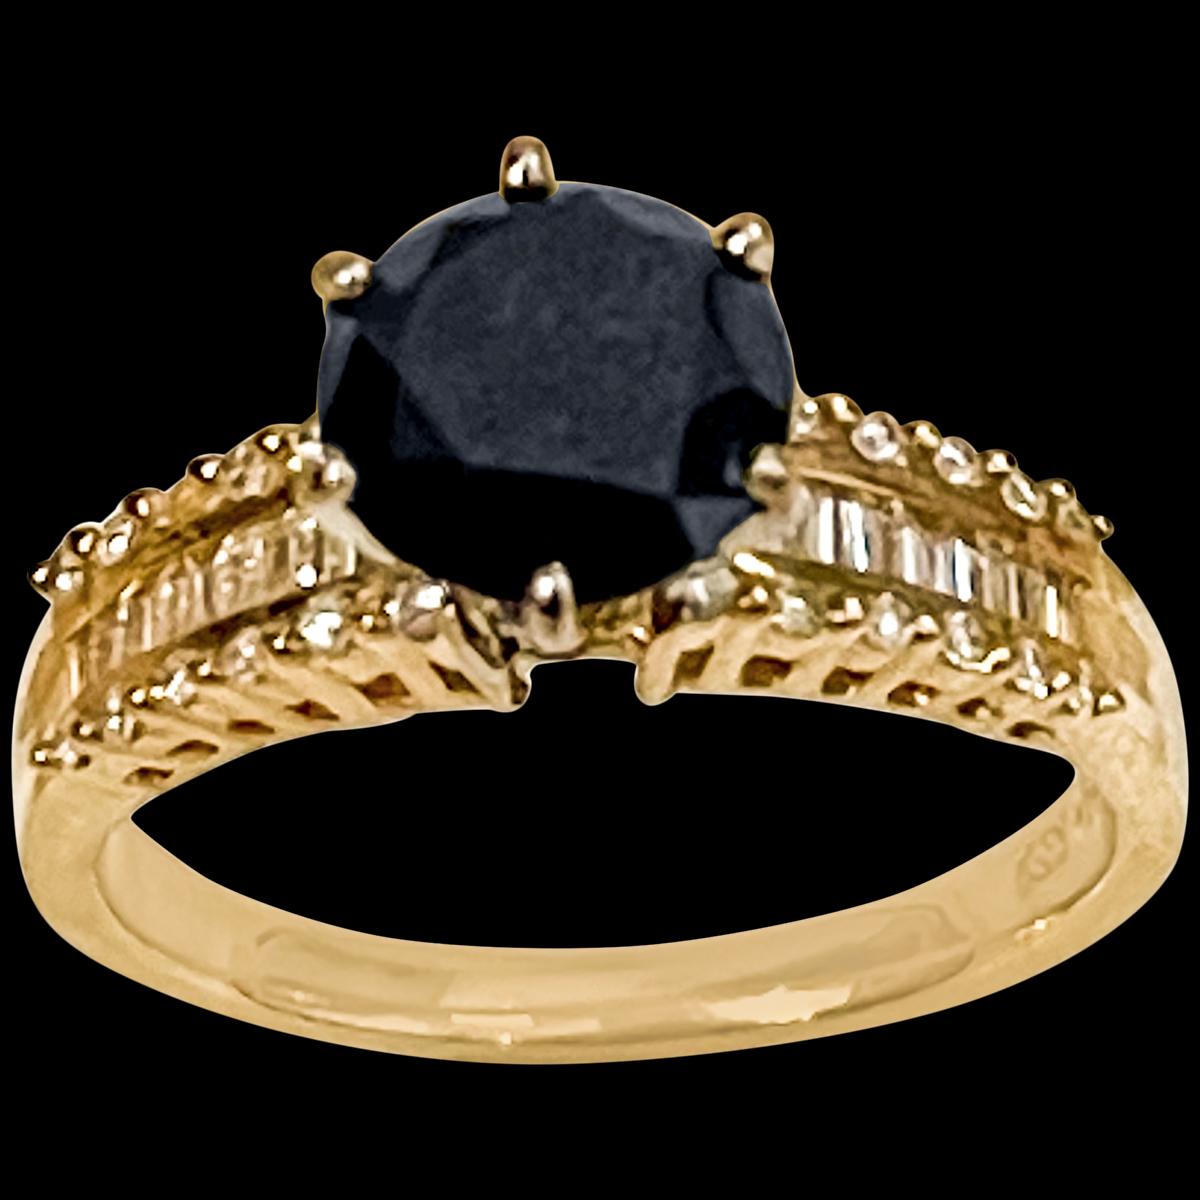 1 Carat Solitaire Black Diamond Traditional Ring/Band 14 Kt Yellow Gold Size 6.5 
 Solitaire round  Black diamond approximately 1  ct and White  diamond, approximately 0.75 ct
White diamonds are baguettes and Brilliant cut round diamonds
This is a